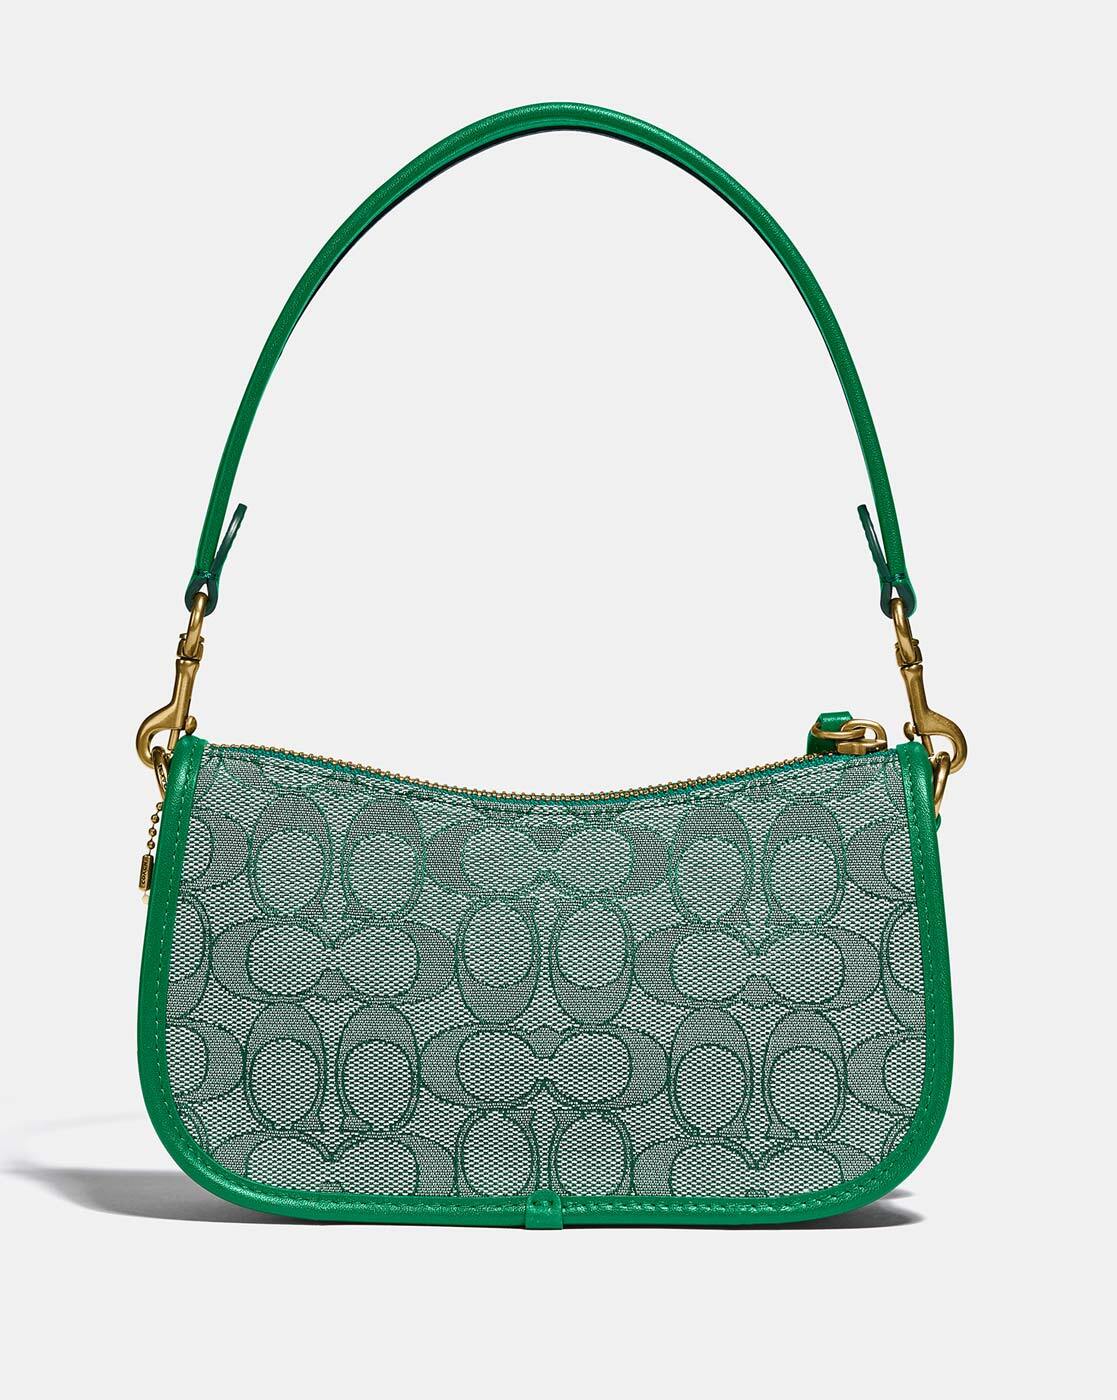 Buy Green Coach Bag Online In India -  India